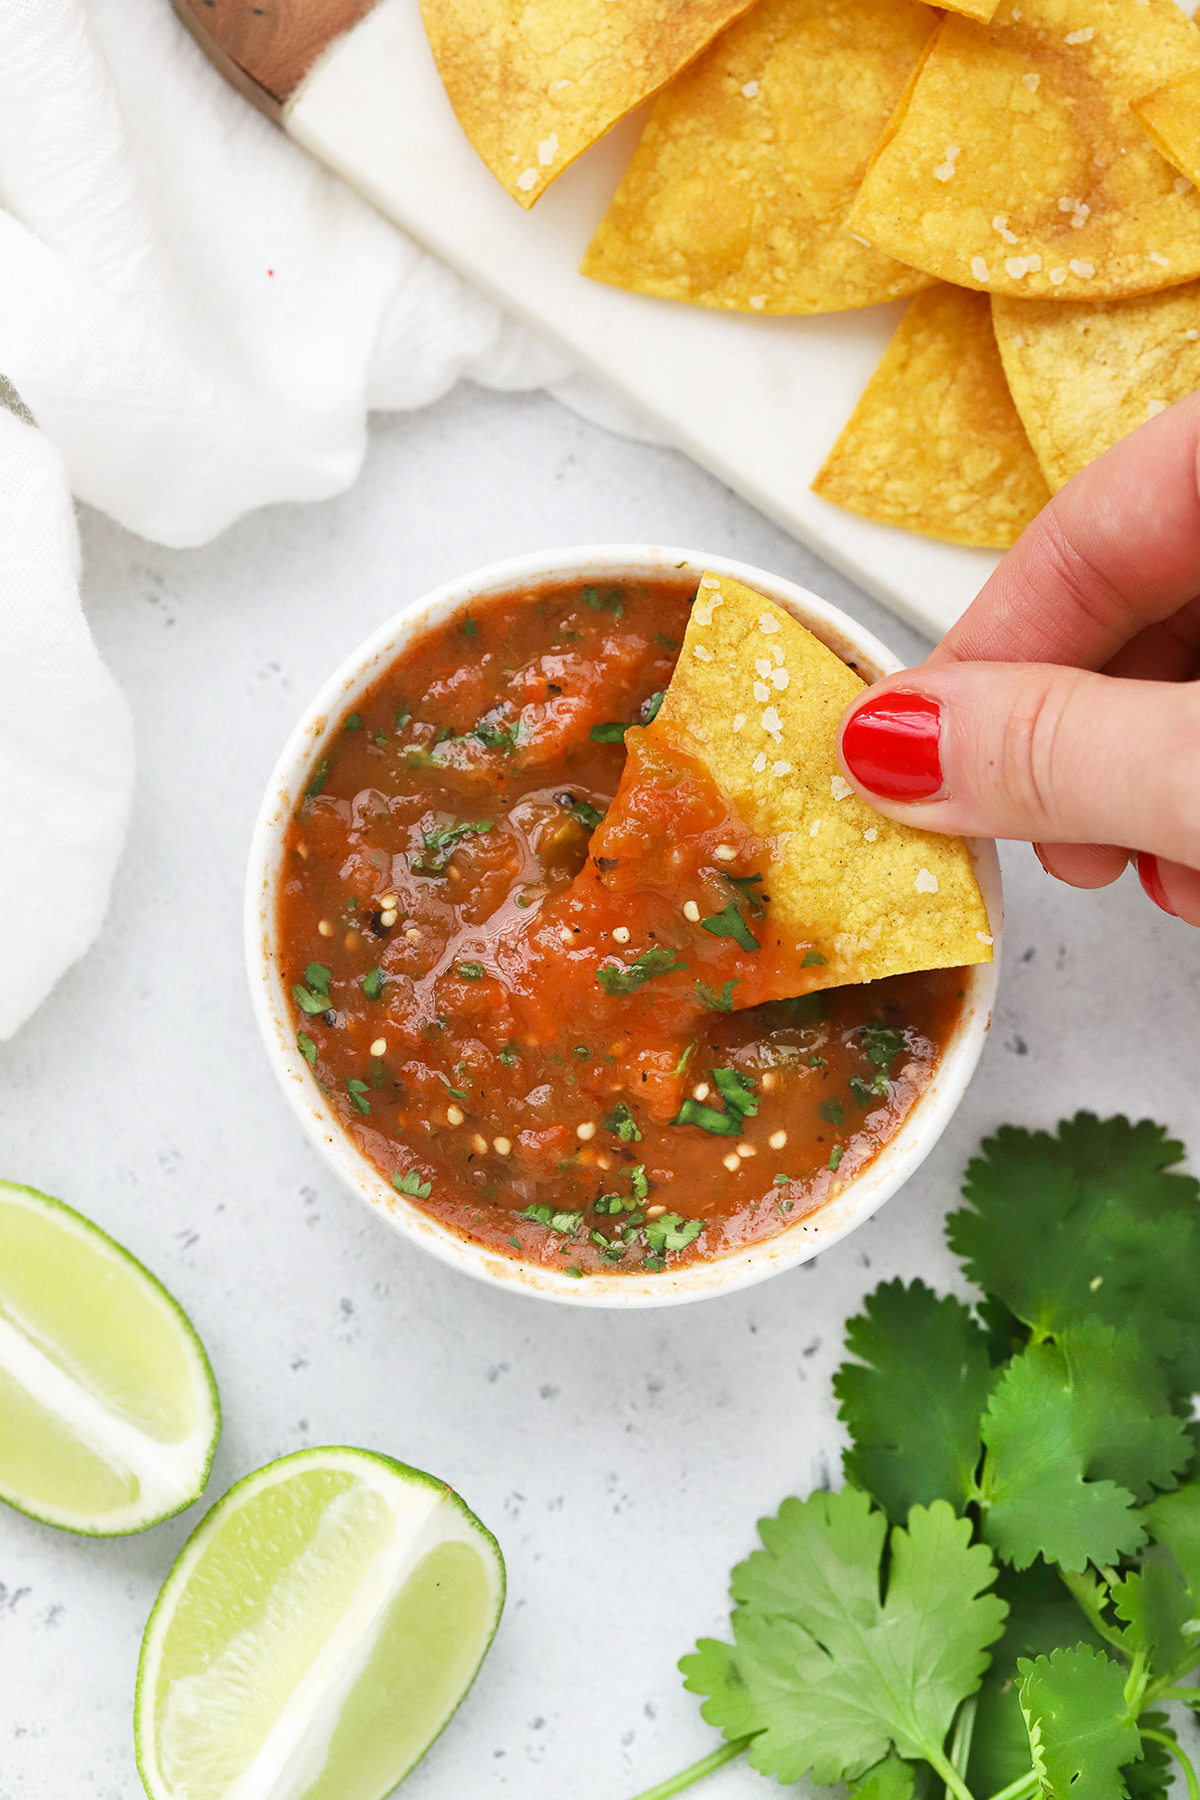 Overhead view of a bowl of chipotle salsa on a white background with tortilla chips